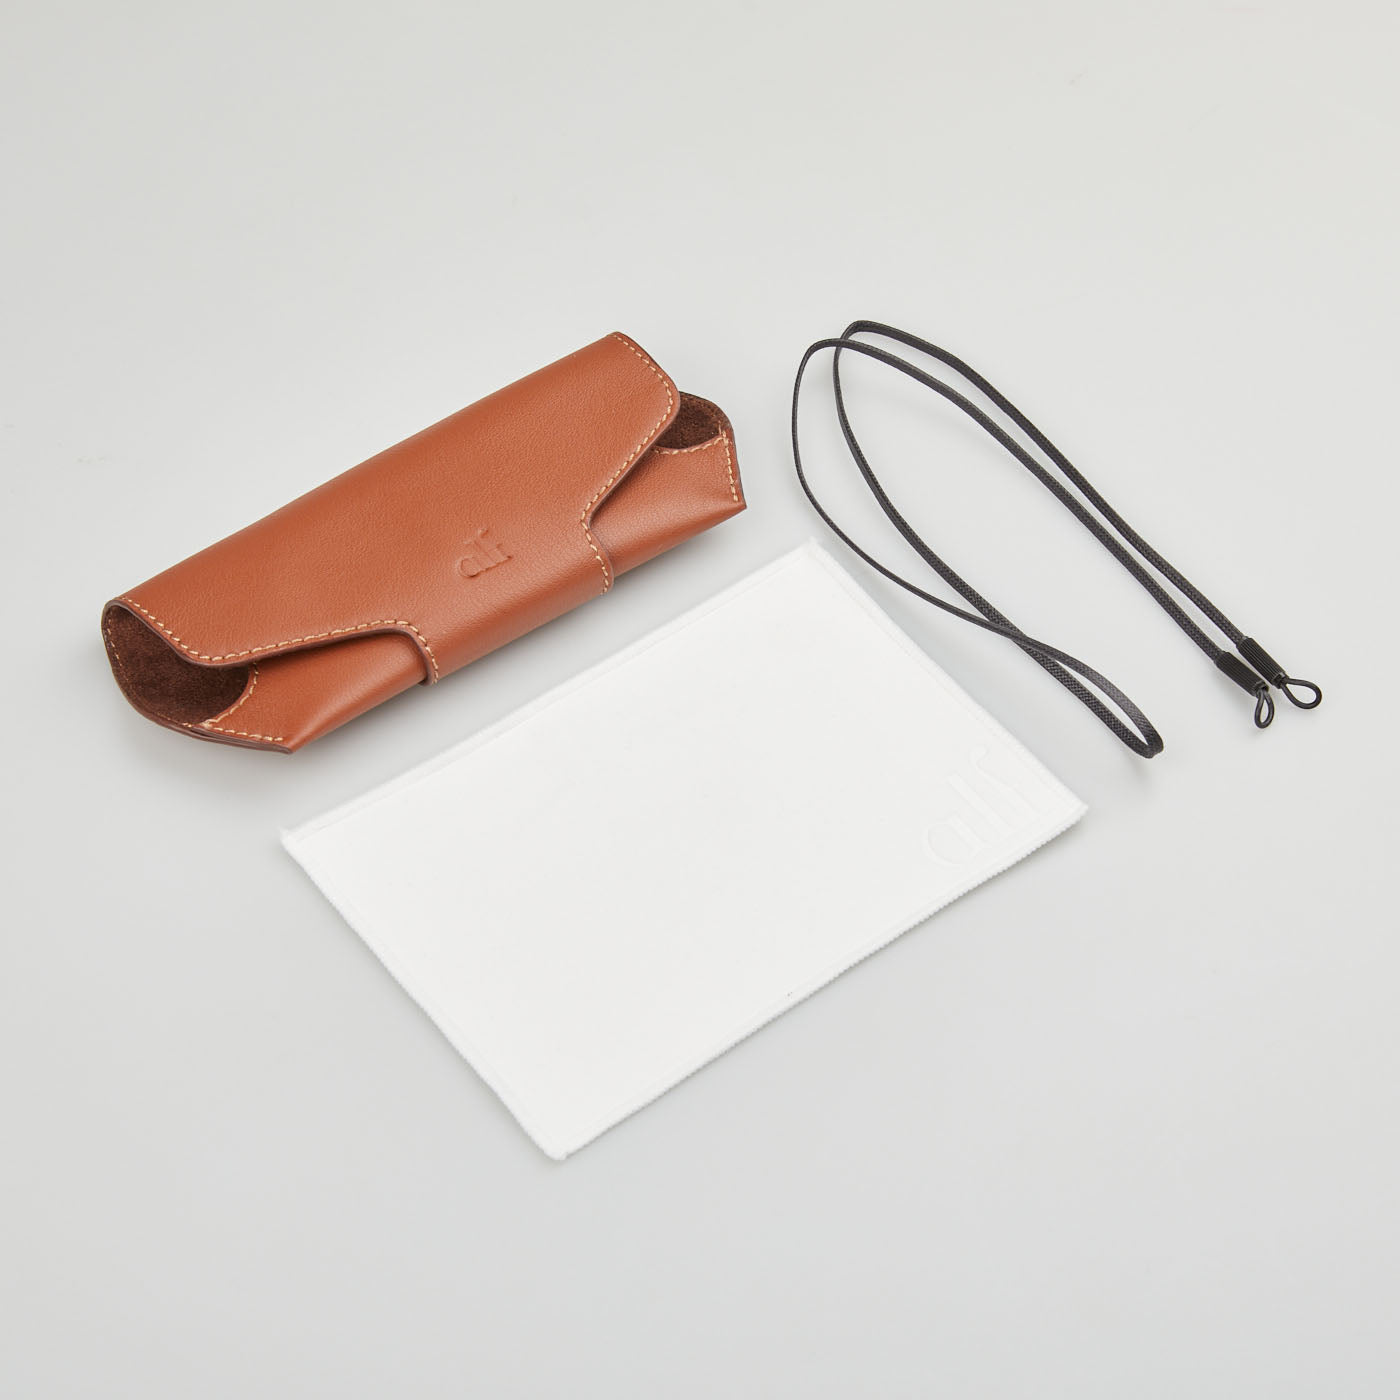 A brown leather case with a notepad and paper for Lunettes Alf Light Tortoise A20.01.003 Sunglasses.